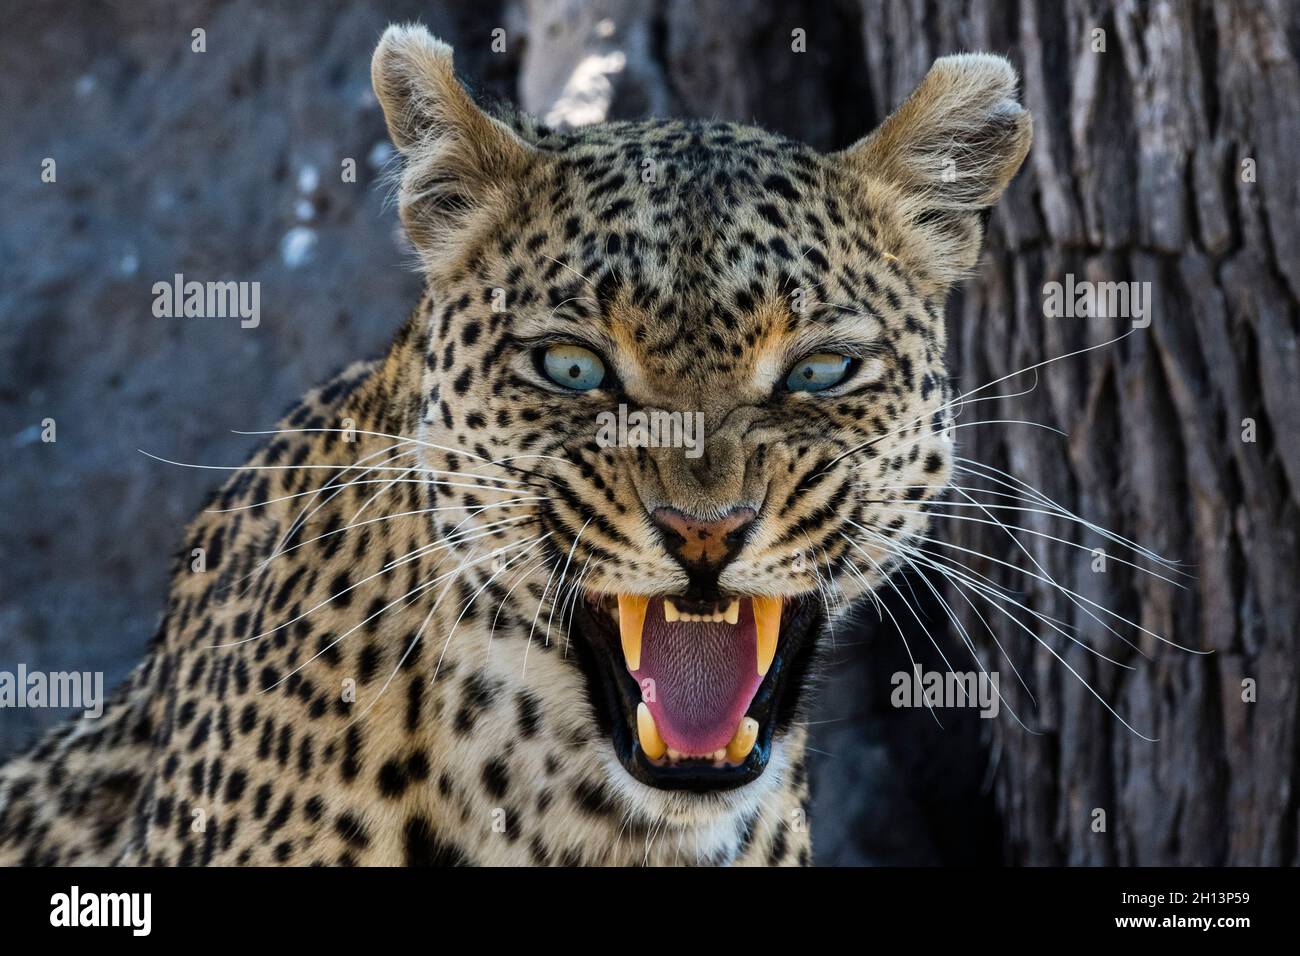 A leopard (Panthera pardus) snarling and looking at the camera, Khwai Concession, Okavango Delta, Botswana. I spent a lot of time with this green eyed Stock Photo